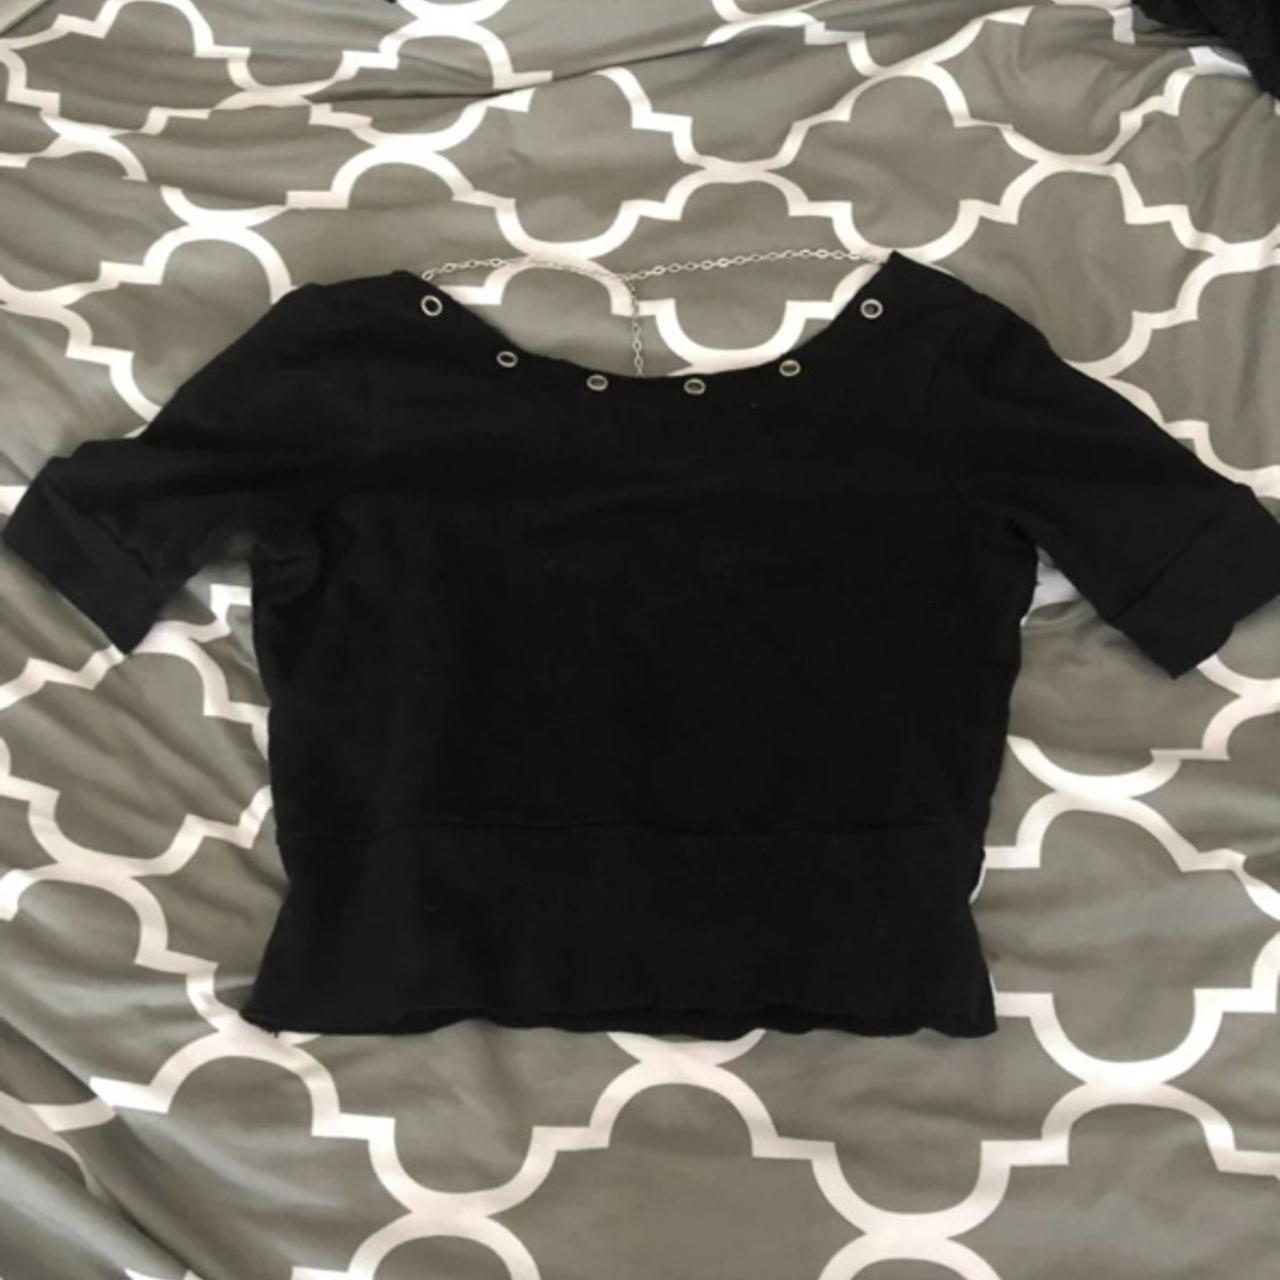 Product Image 3 - Back Drop Black Crop Top

Edgy